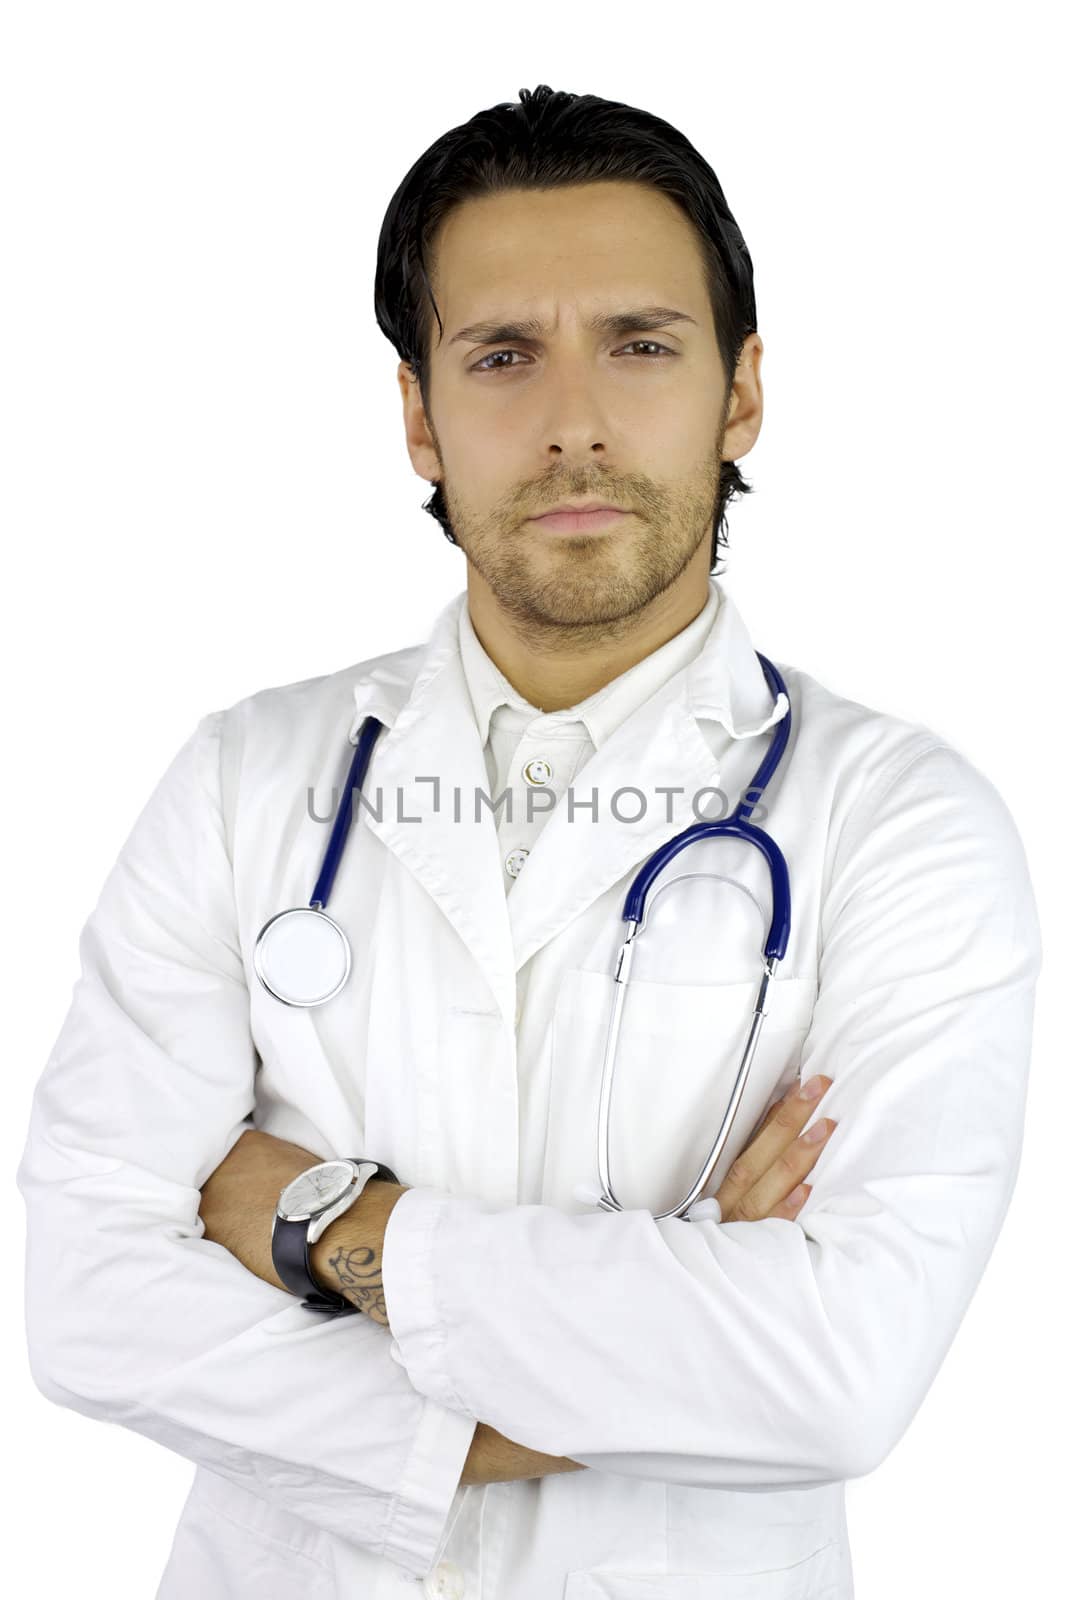 Cool good looking serious doctor by fmarsicano